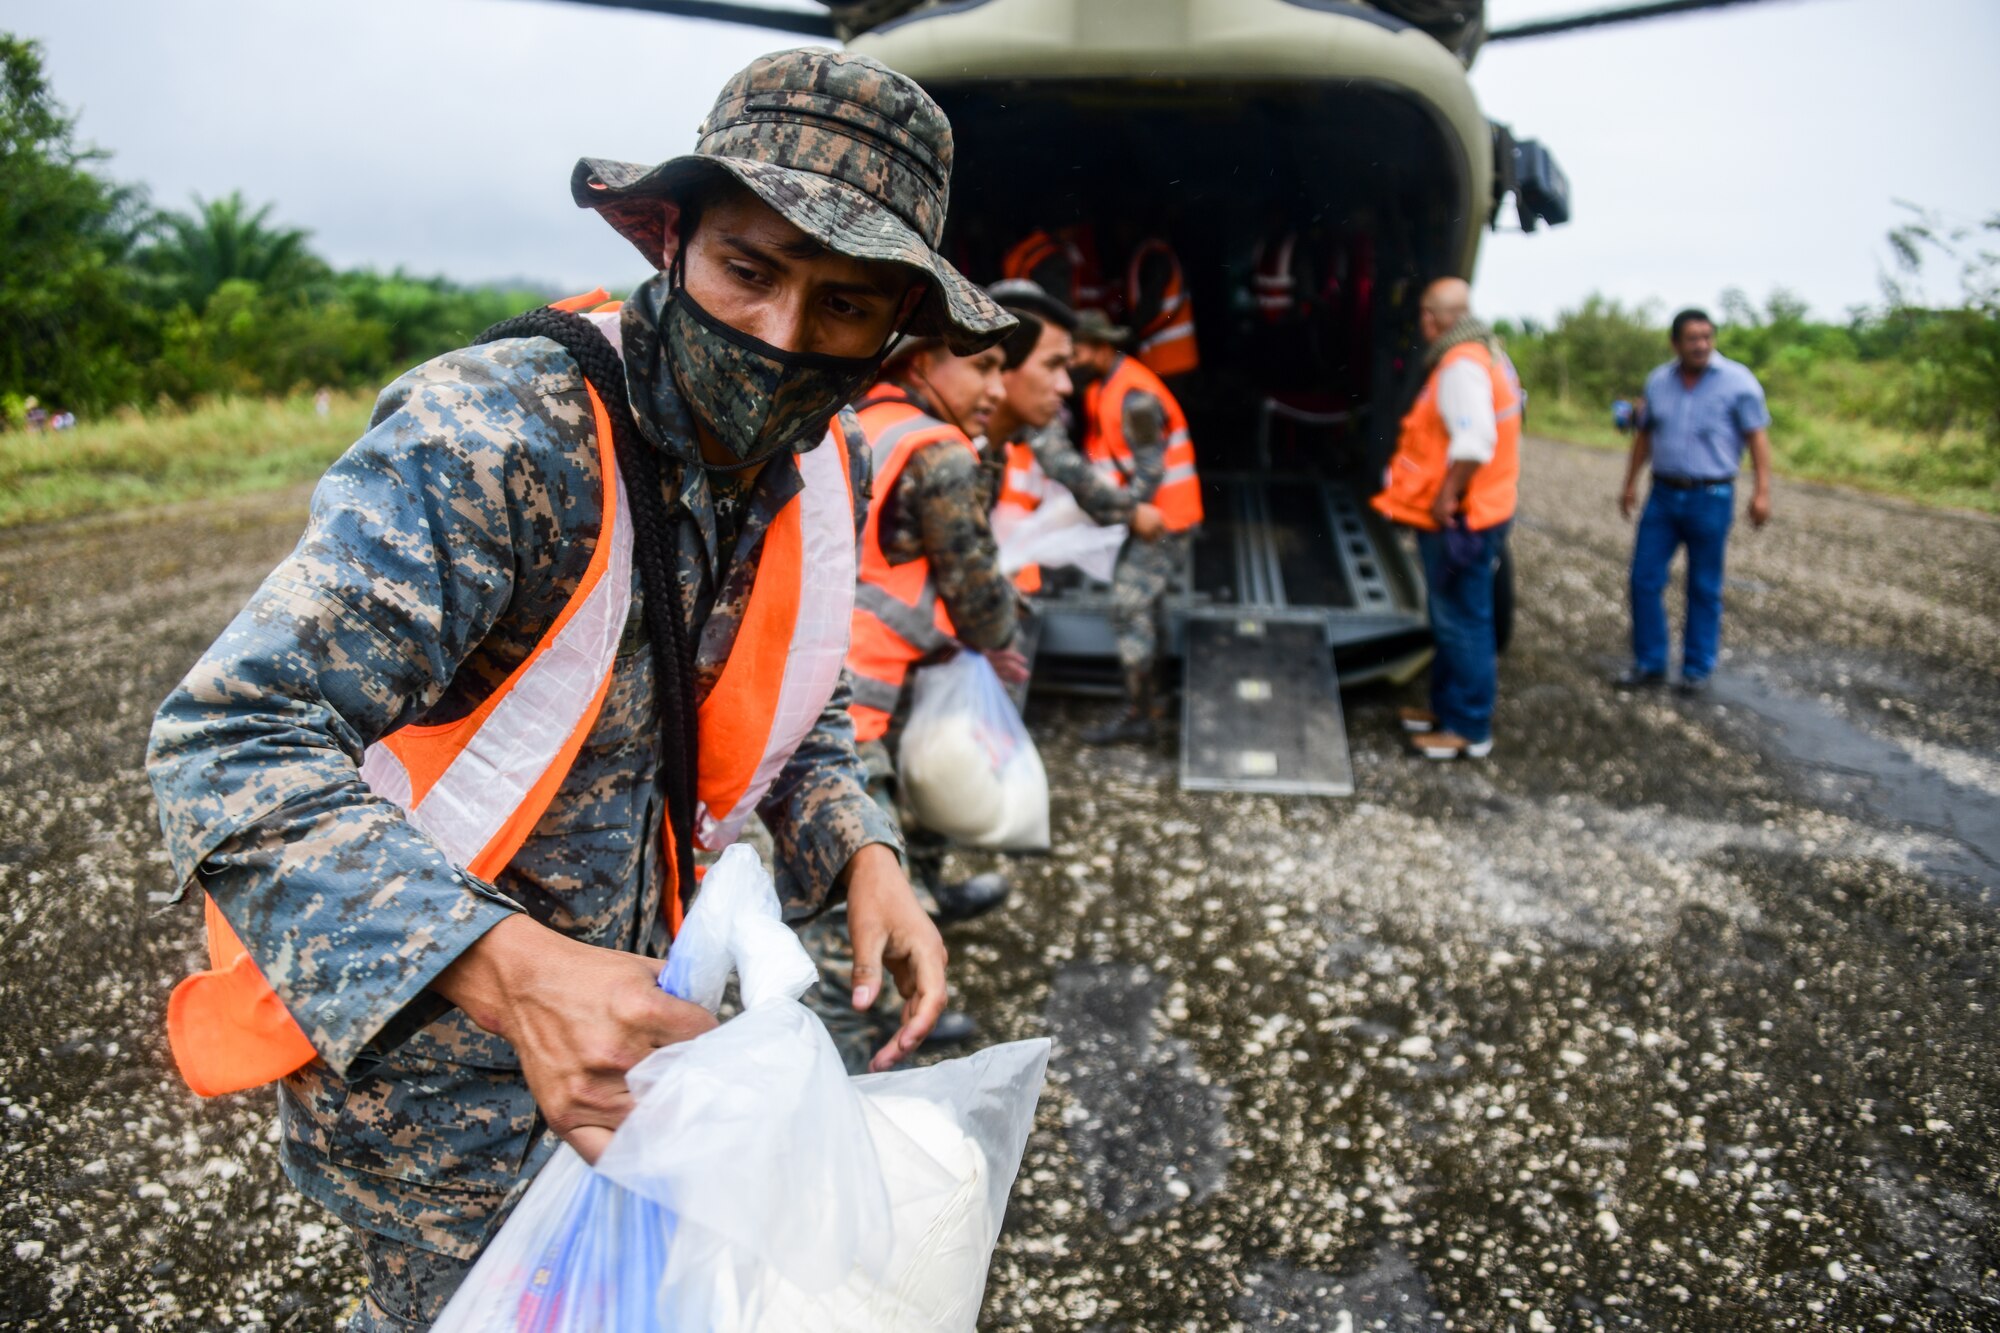 JTF-Bravo concludes disaster relief efforts